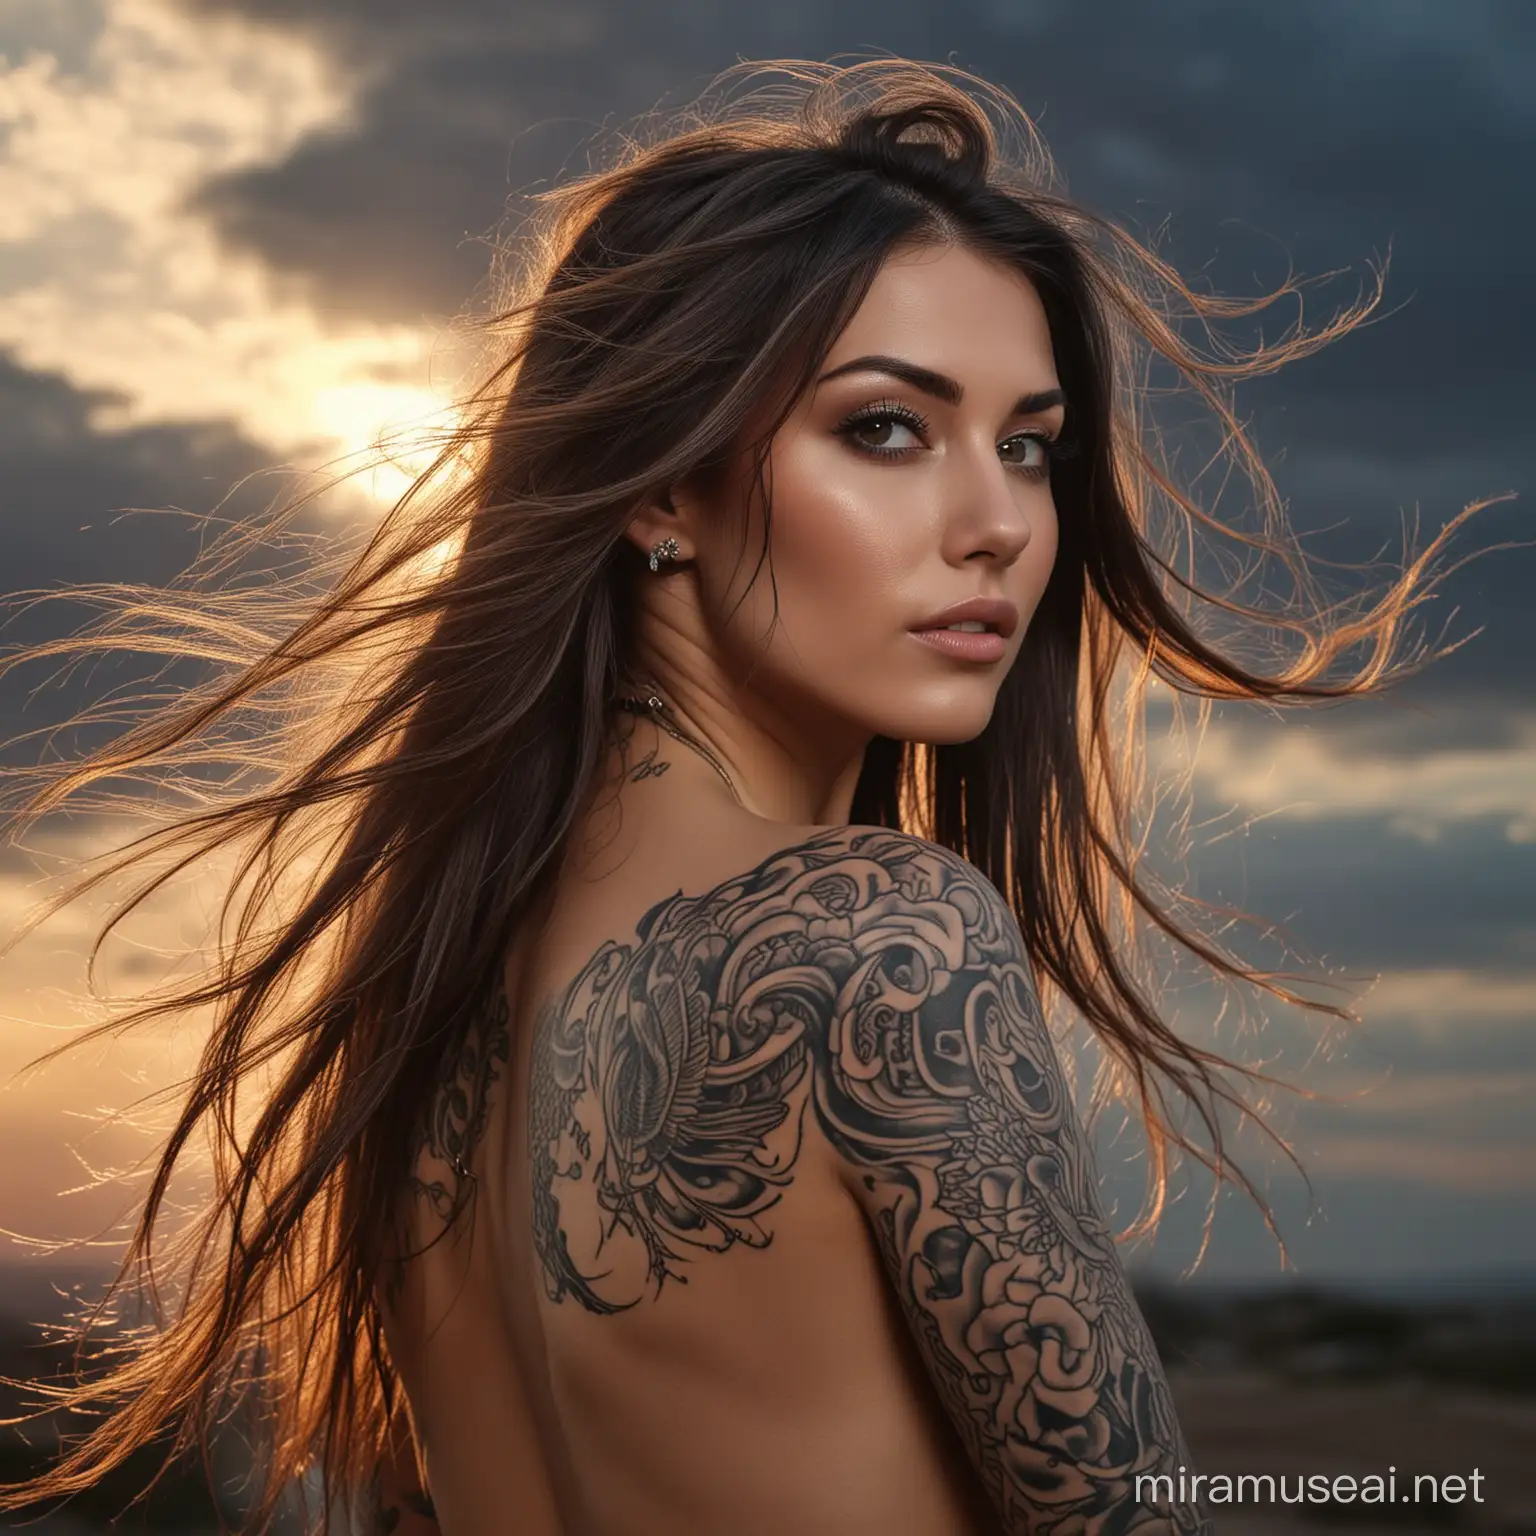 Detailed Top View Portrait of a Beautiful Tattooed Woman with Long Hair in Evening Sky